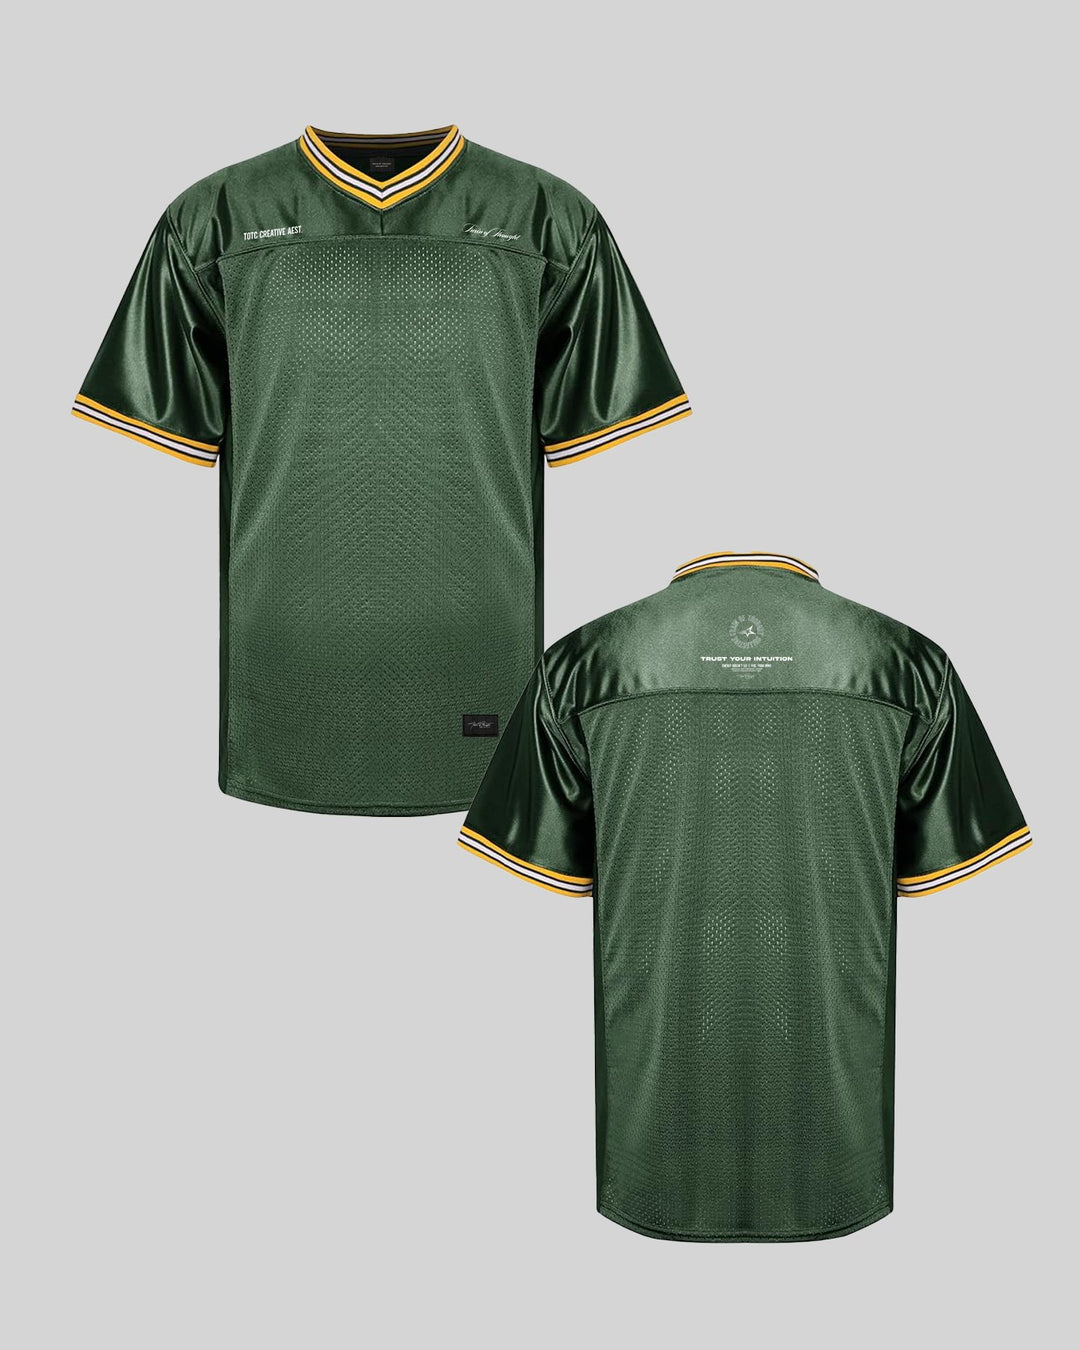 111ntuition Army Green Football Jersey - trainofthoughtcollective